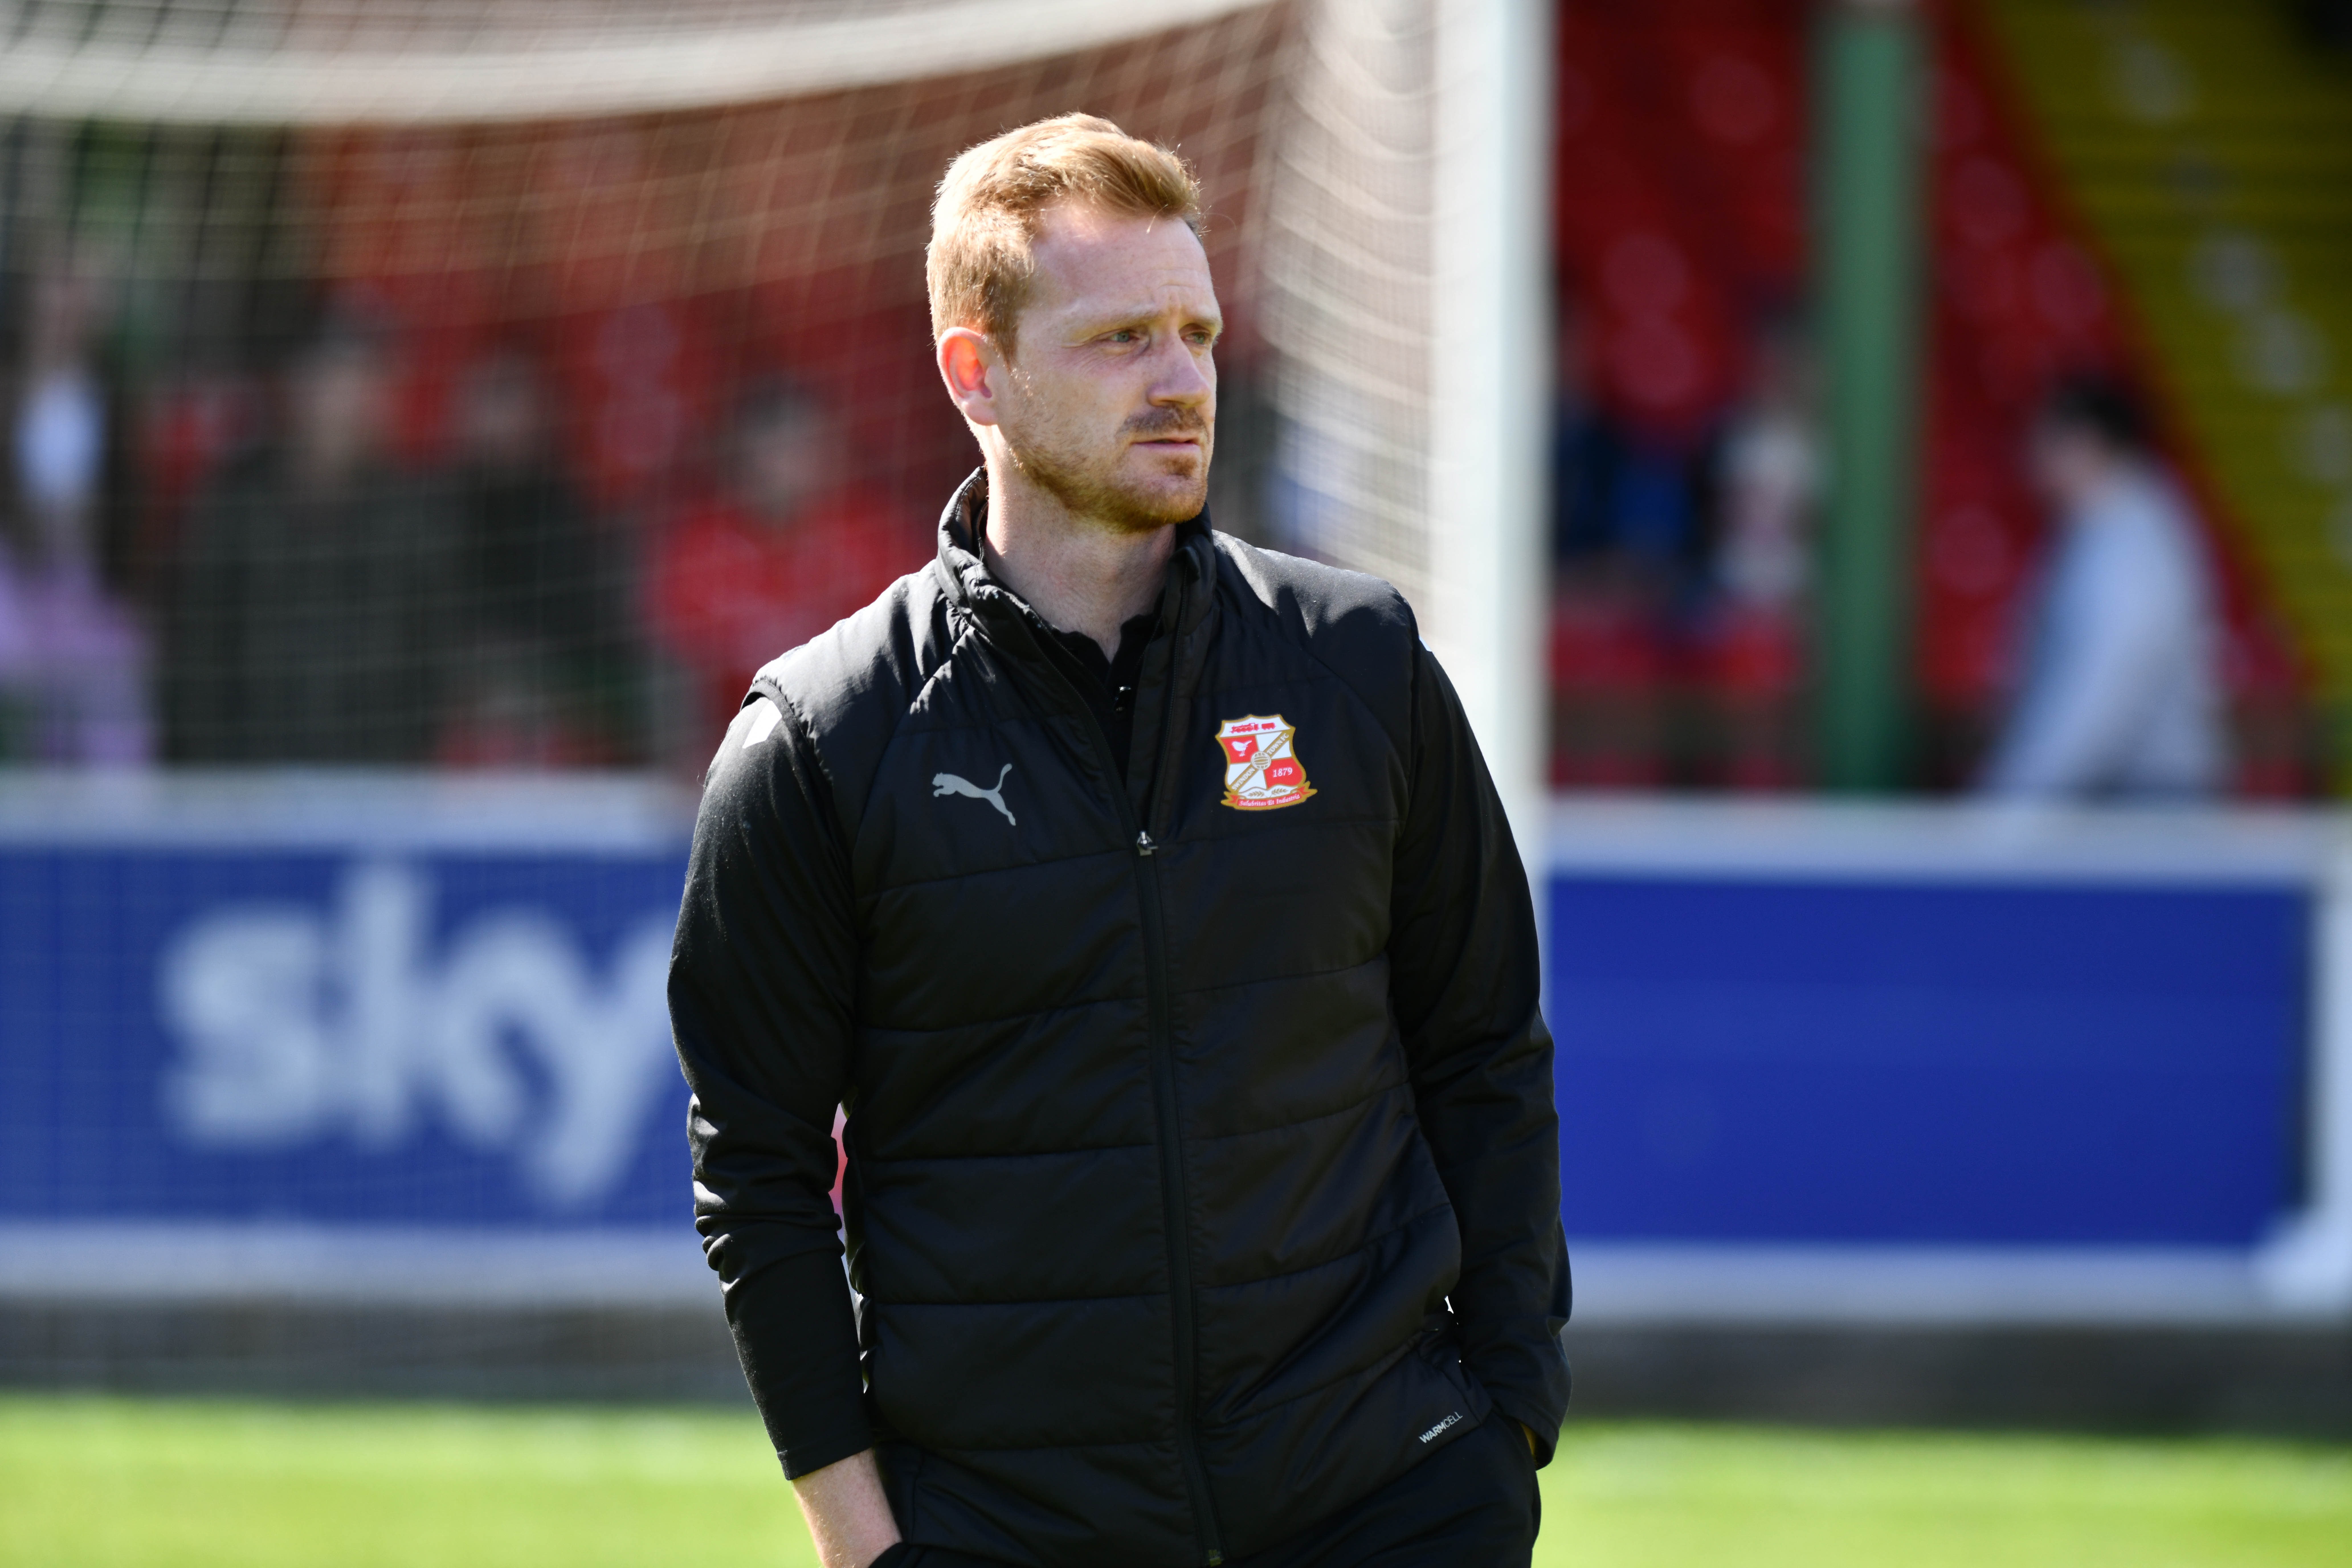 Ed Brand thinks the confidence gained against Bradford could be a turning point for Swindon